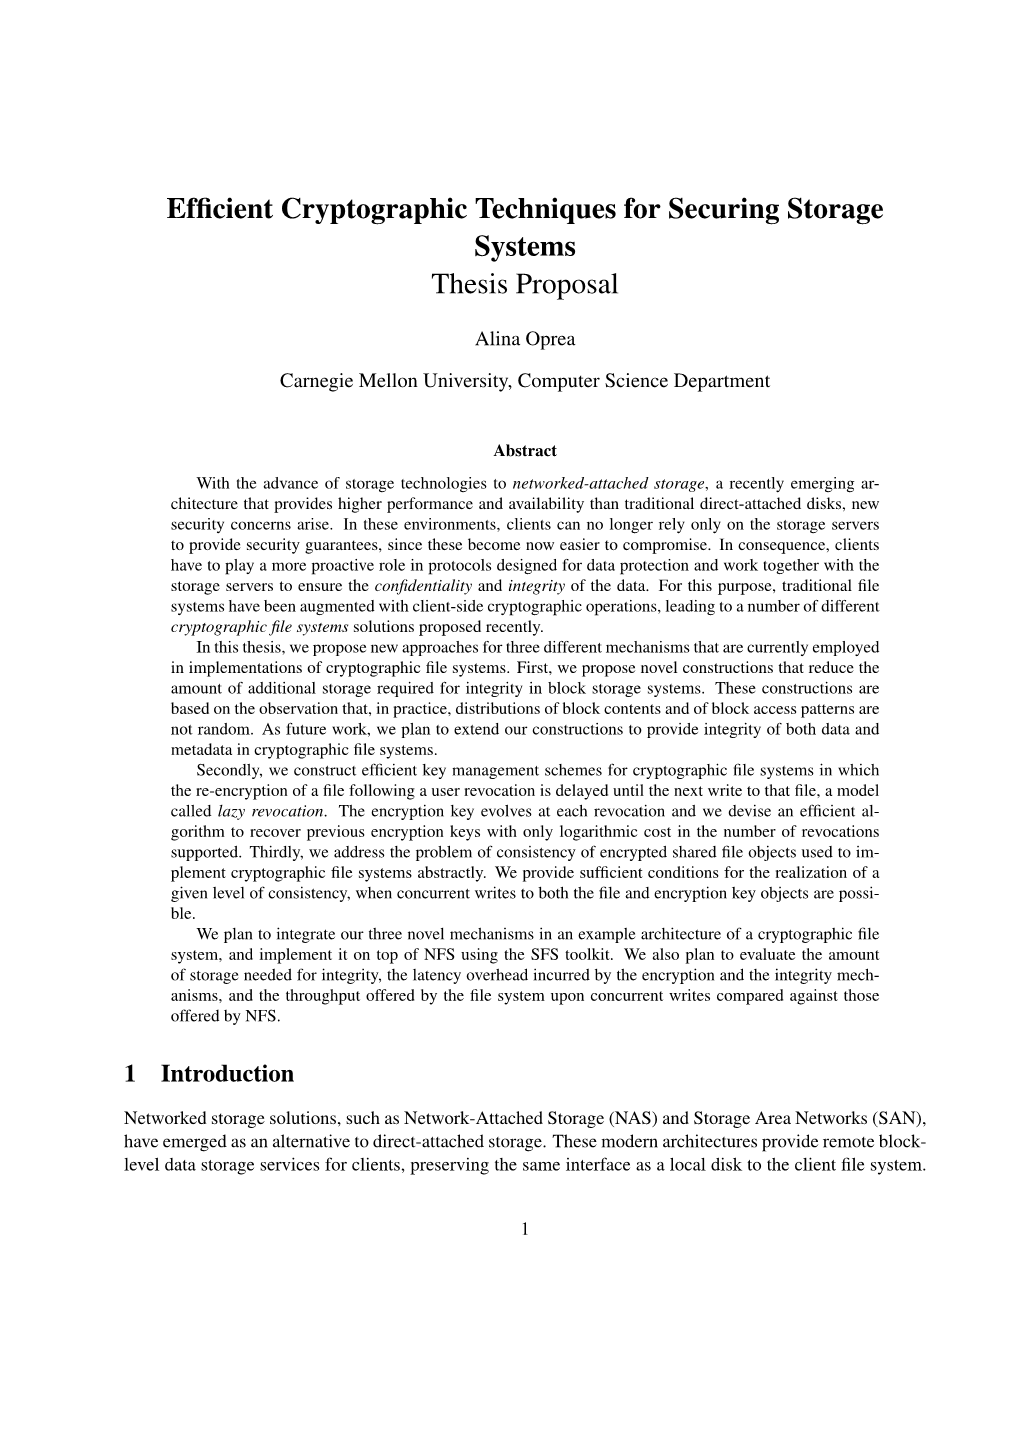 Efficient Cryptographic Techniques for Securing Storage Systems Thesis Proposal